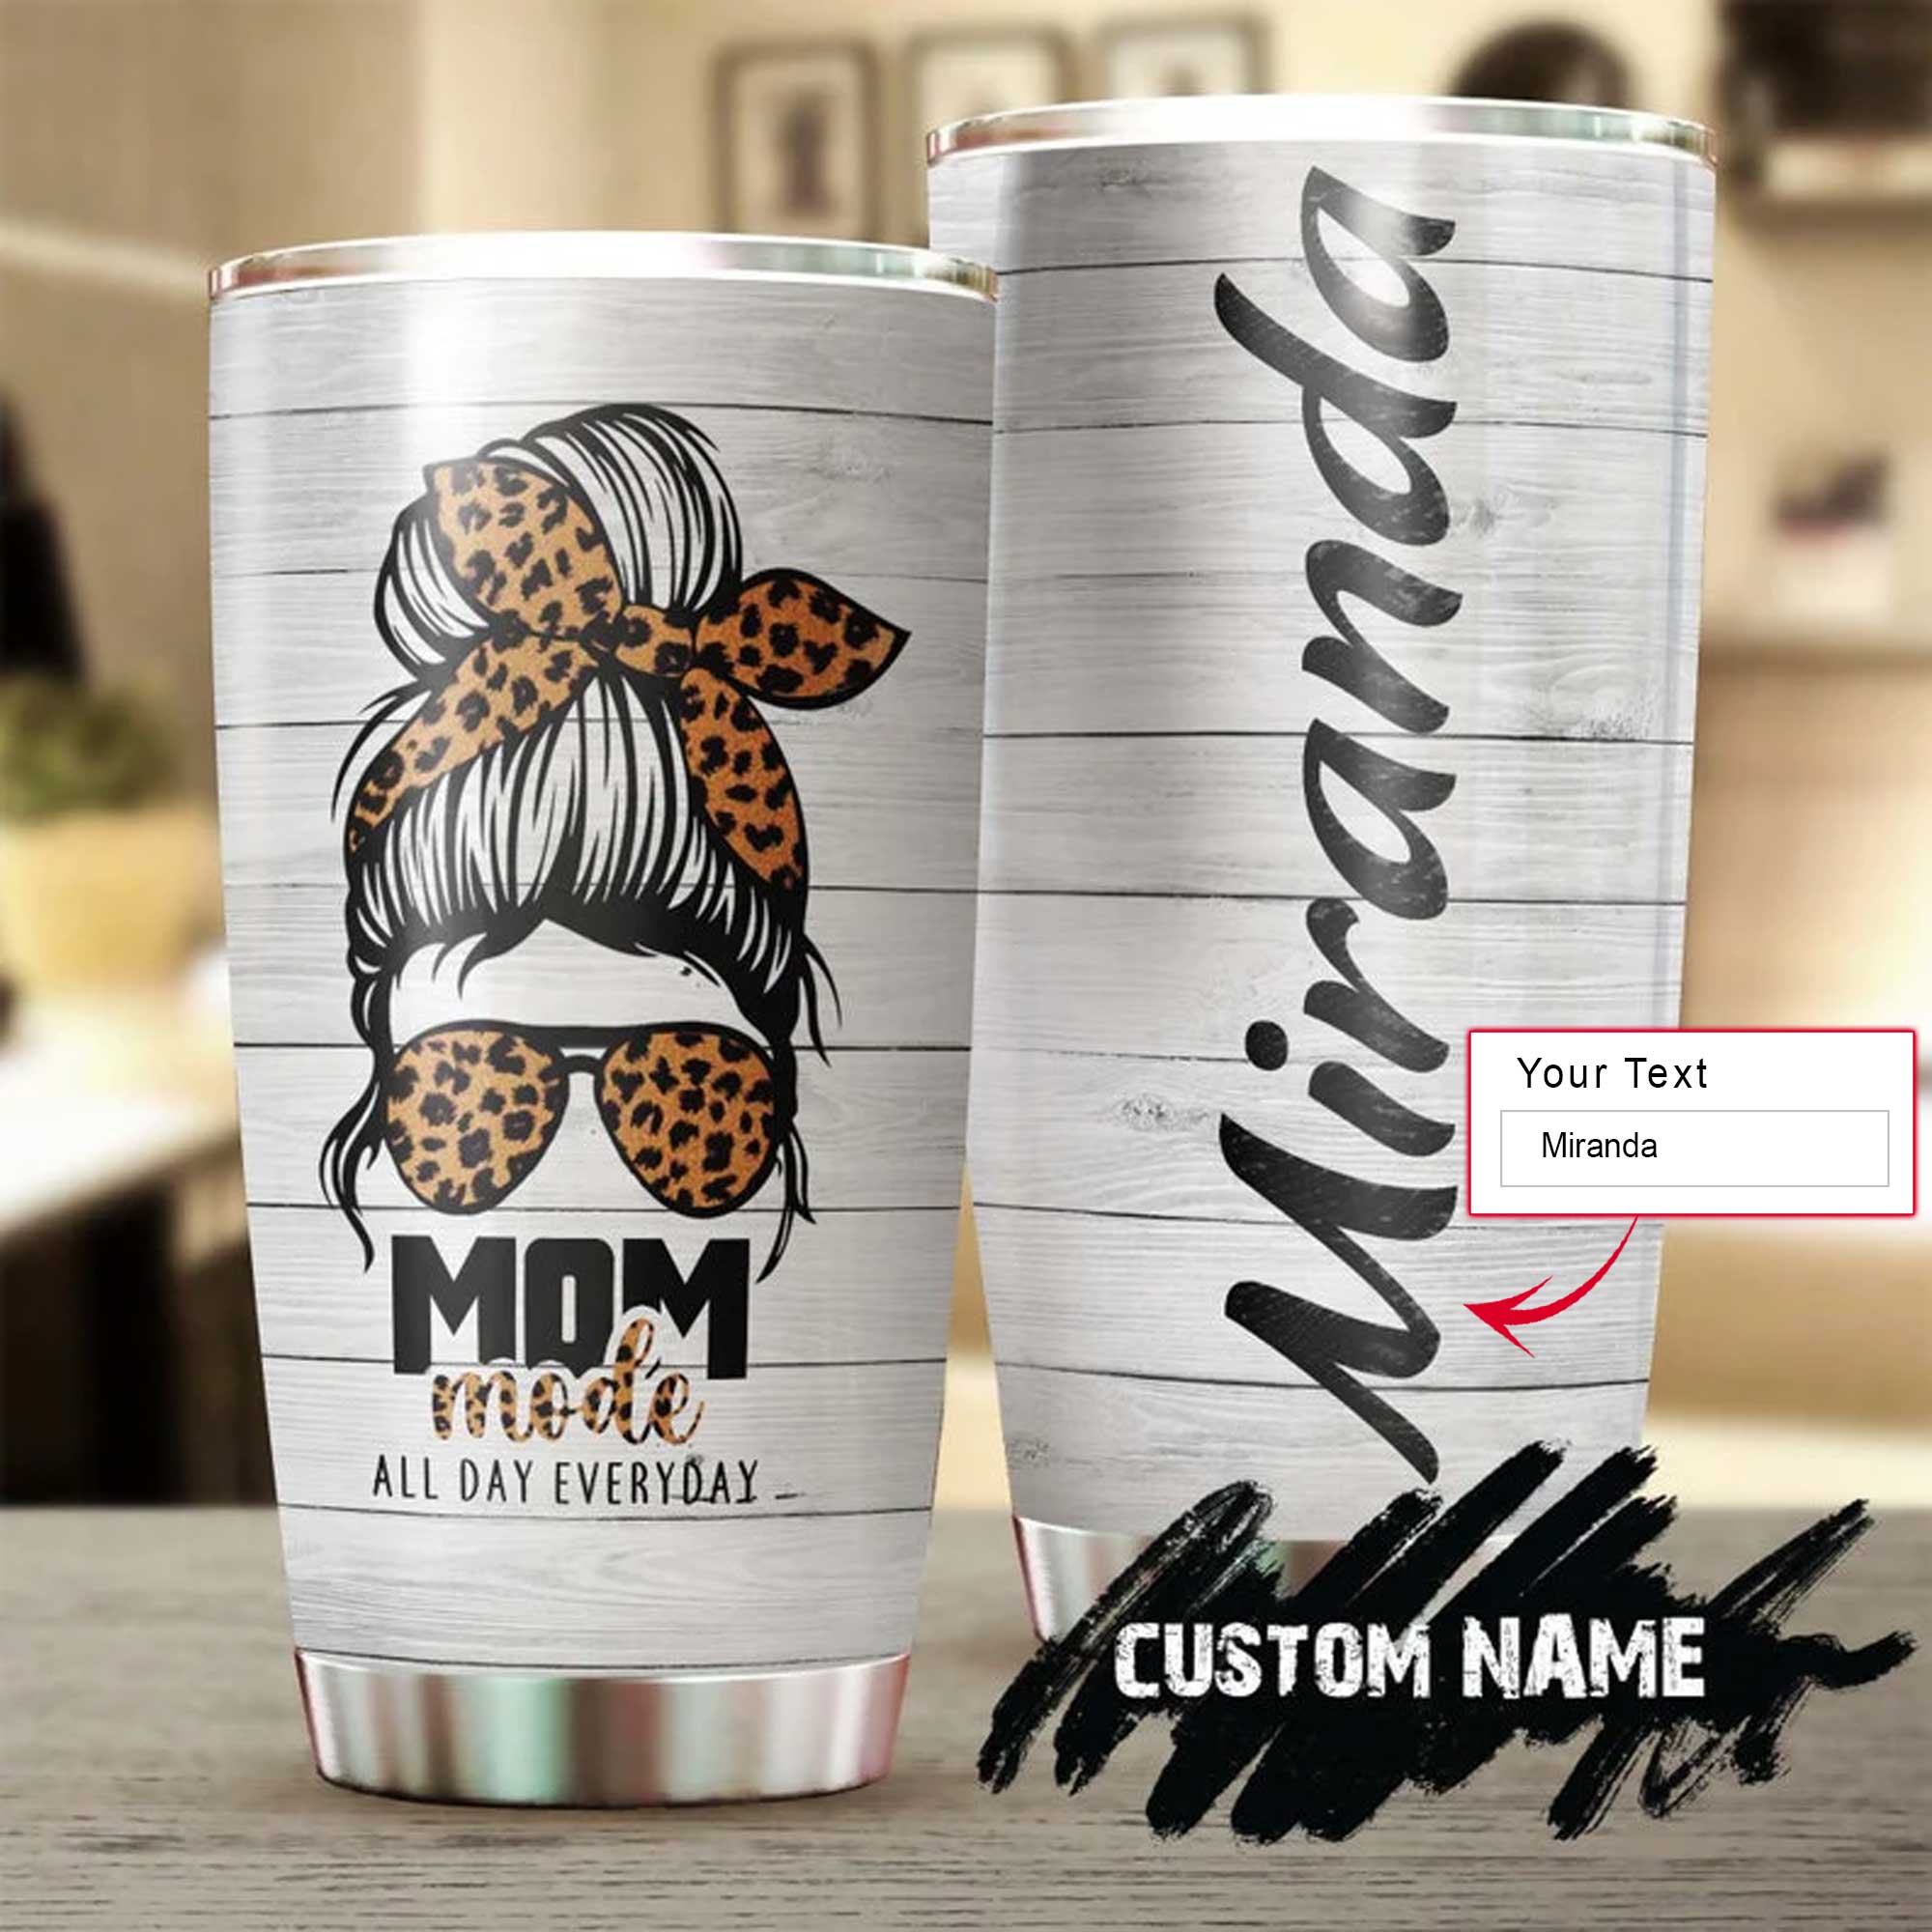 Personalized Mother's Day Gift Tumbler - Custom Gift For Mother's Day, Presents For Mom - Mom Mode All Day Every Day Messy Bun Tumbler